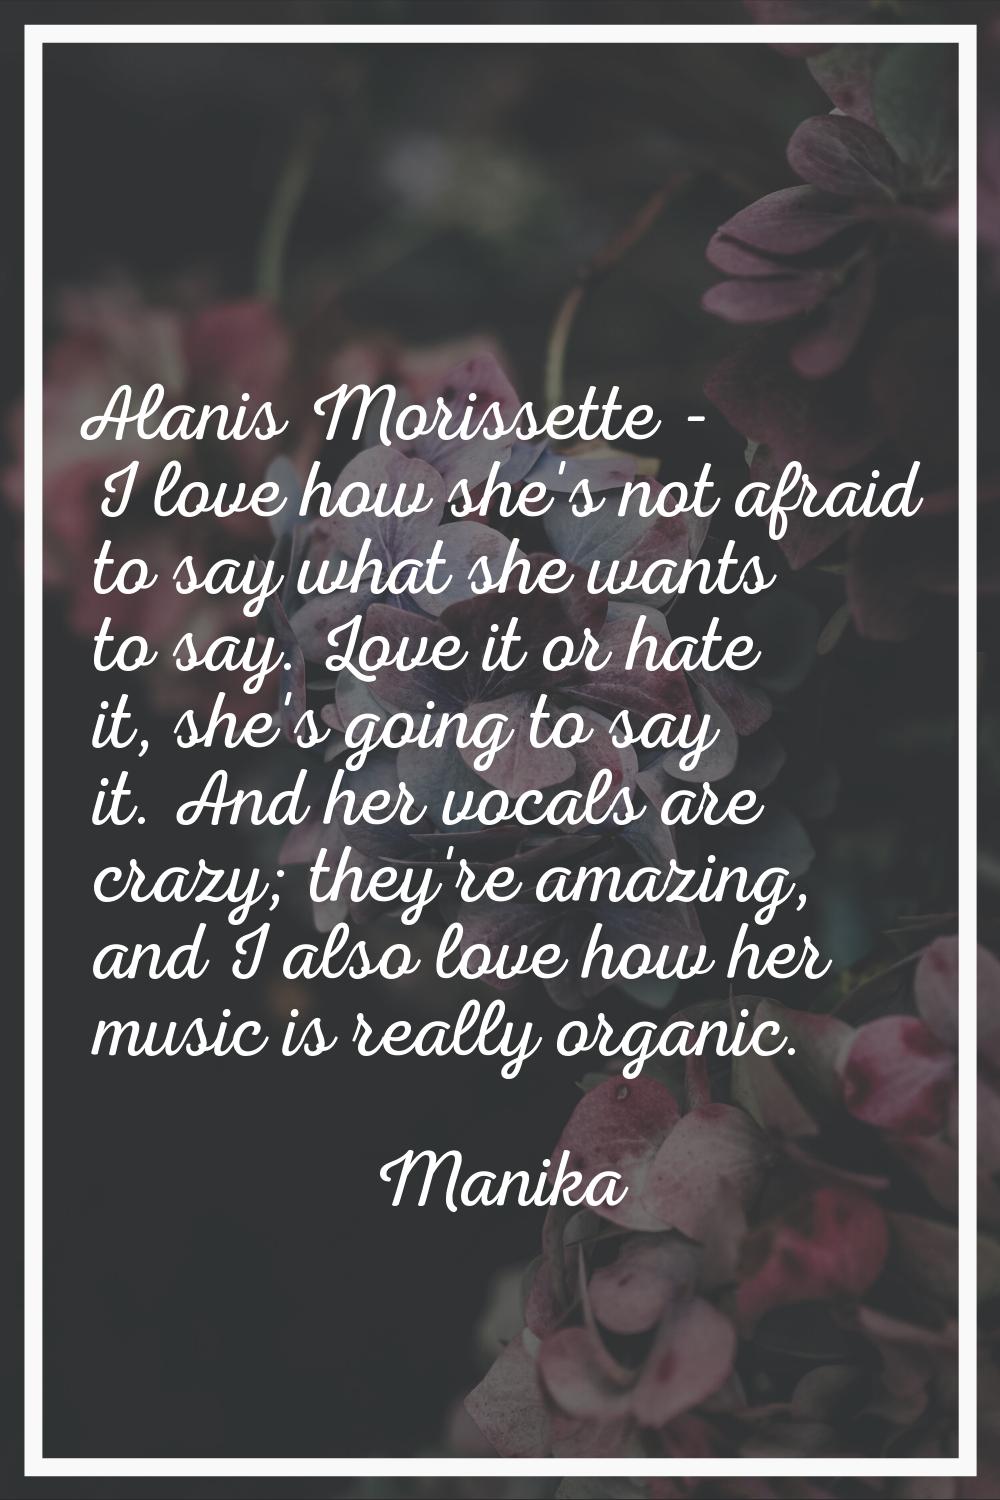 Alanis Morissette - I love how she's not afraid to say what she wants to say. Love it or hate it, s